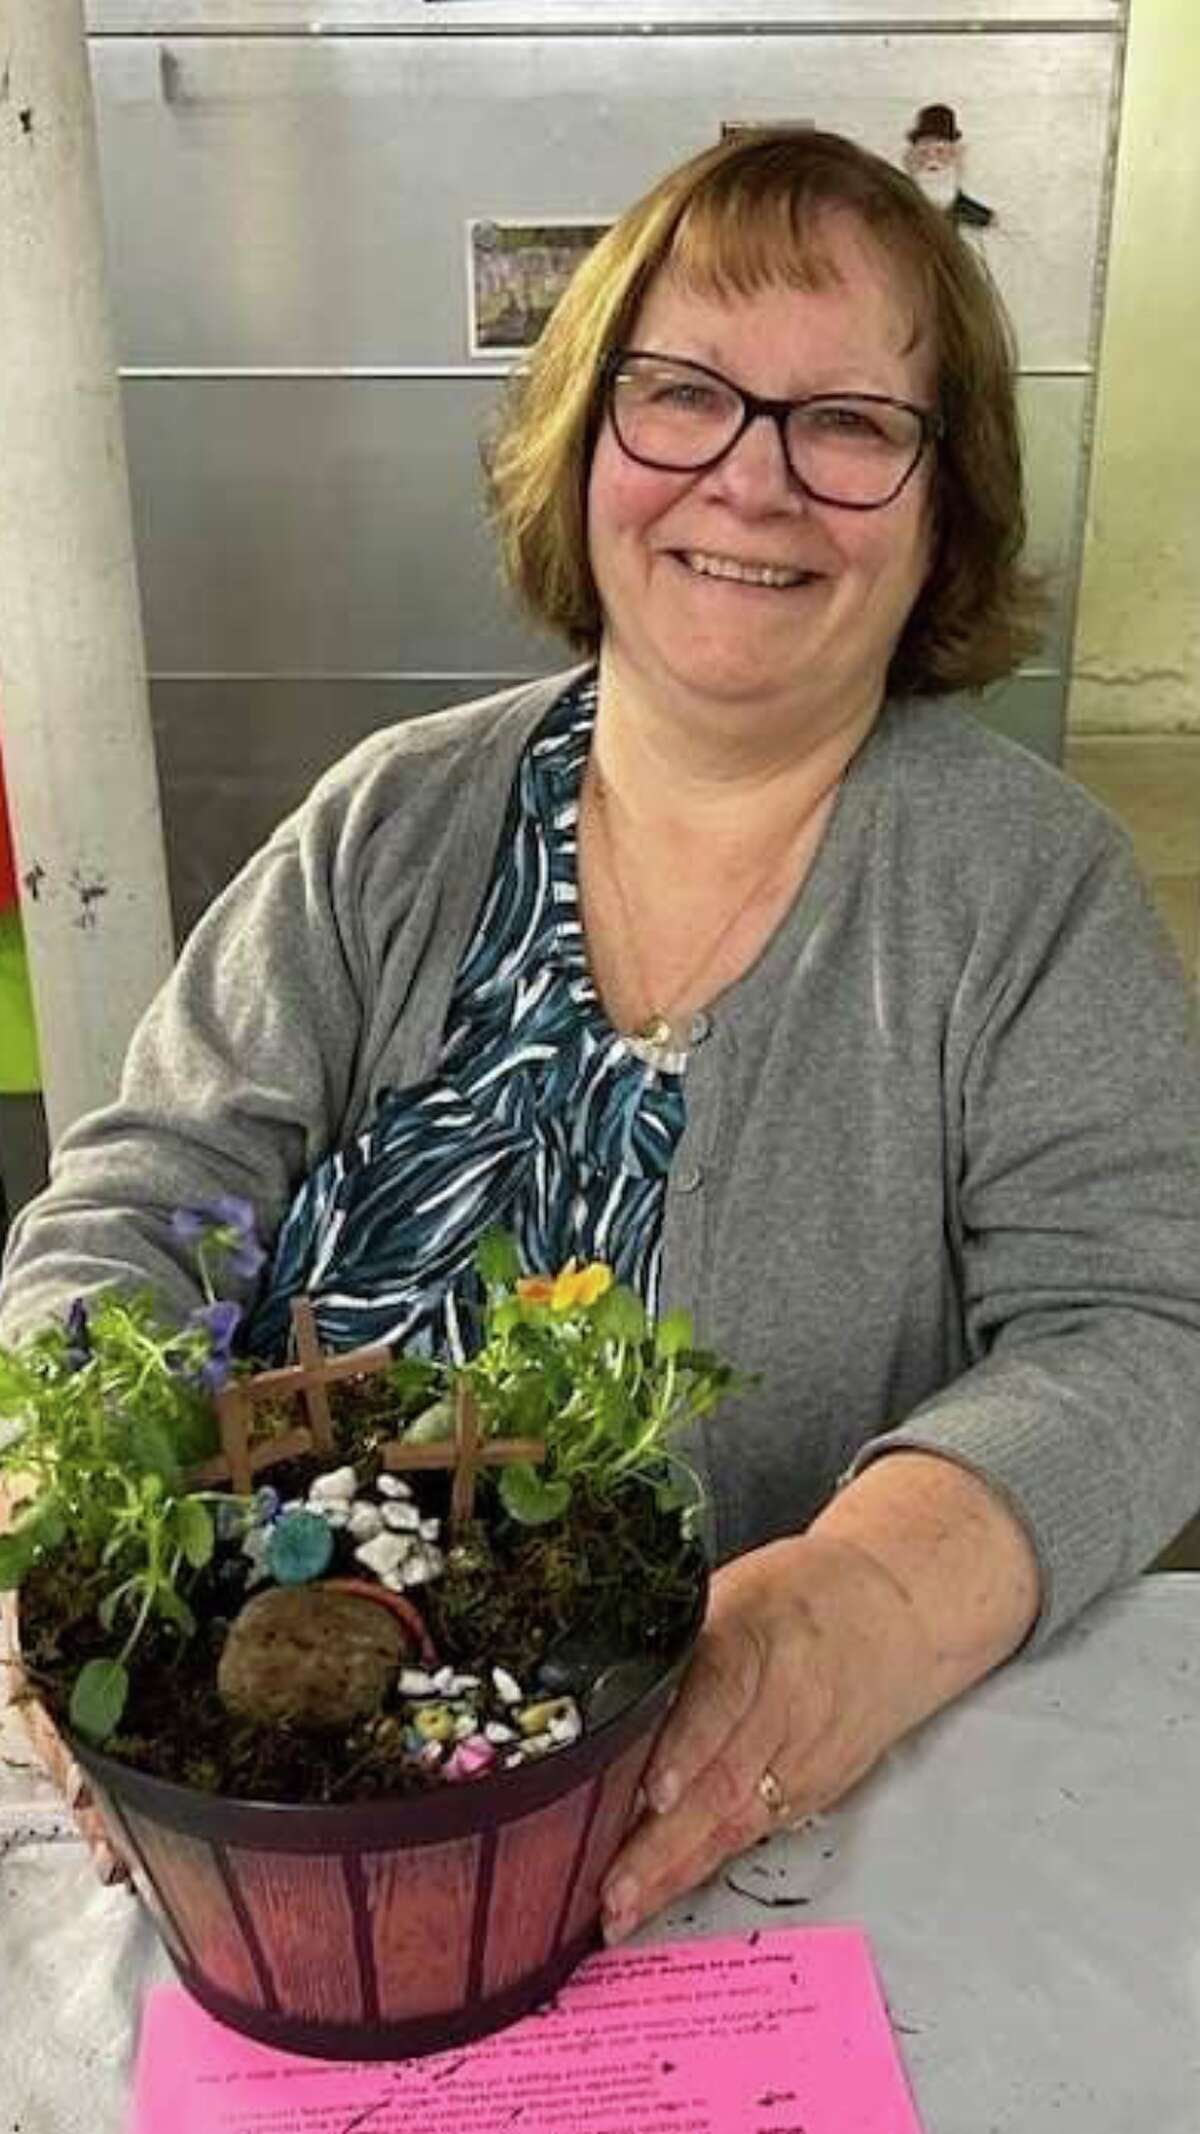 Horticulturist Rhonda Allen with Jersey County Arts Council holds a miniature resurrection garden. She led a recent class in creating such gardens for Easter.